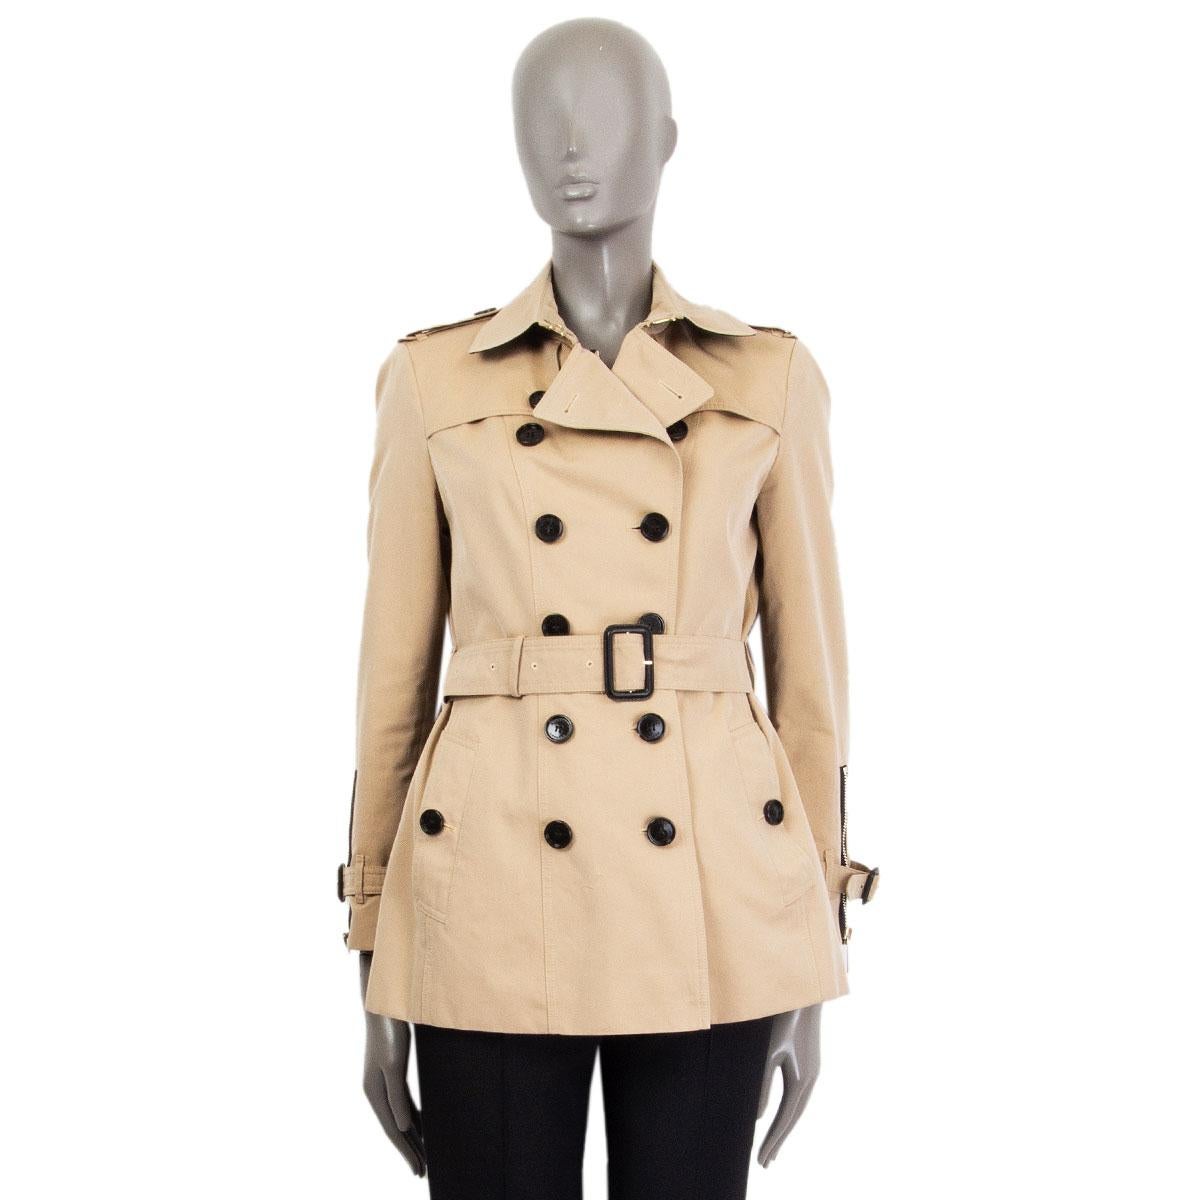 
100% authentic Burberry Prorsum belted zipper trench jacket in beige cotton (100%). Opens with double breasted buttons and a zipper. Comes with a waist belt, a gun flap, two side pockets, épaulettes and features zipped cuffs. Lined in black, white